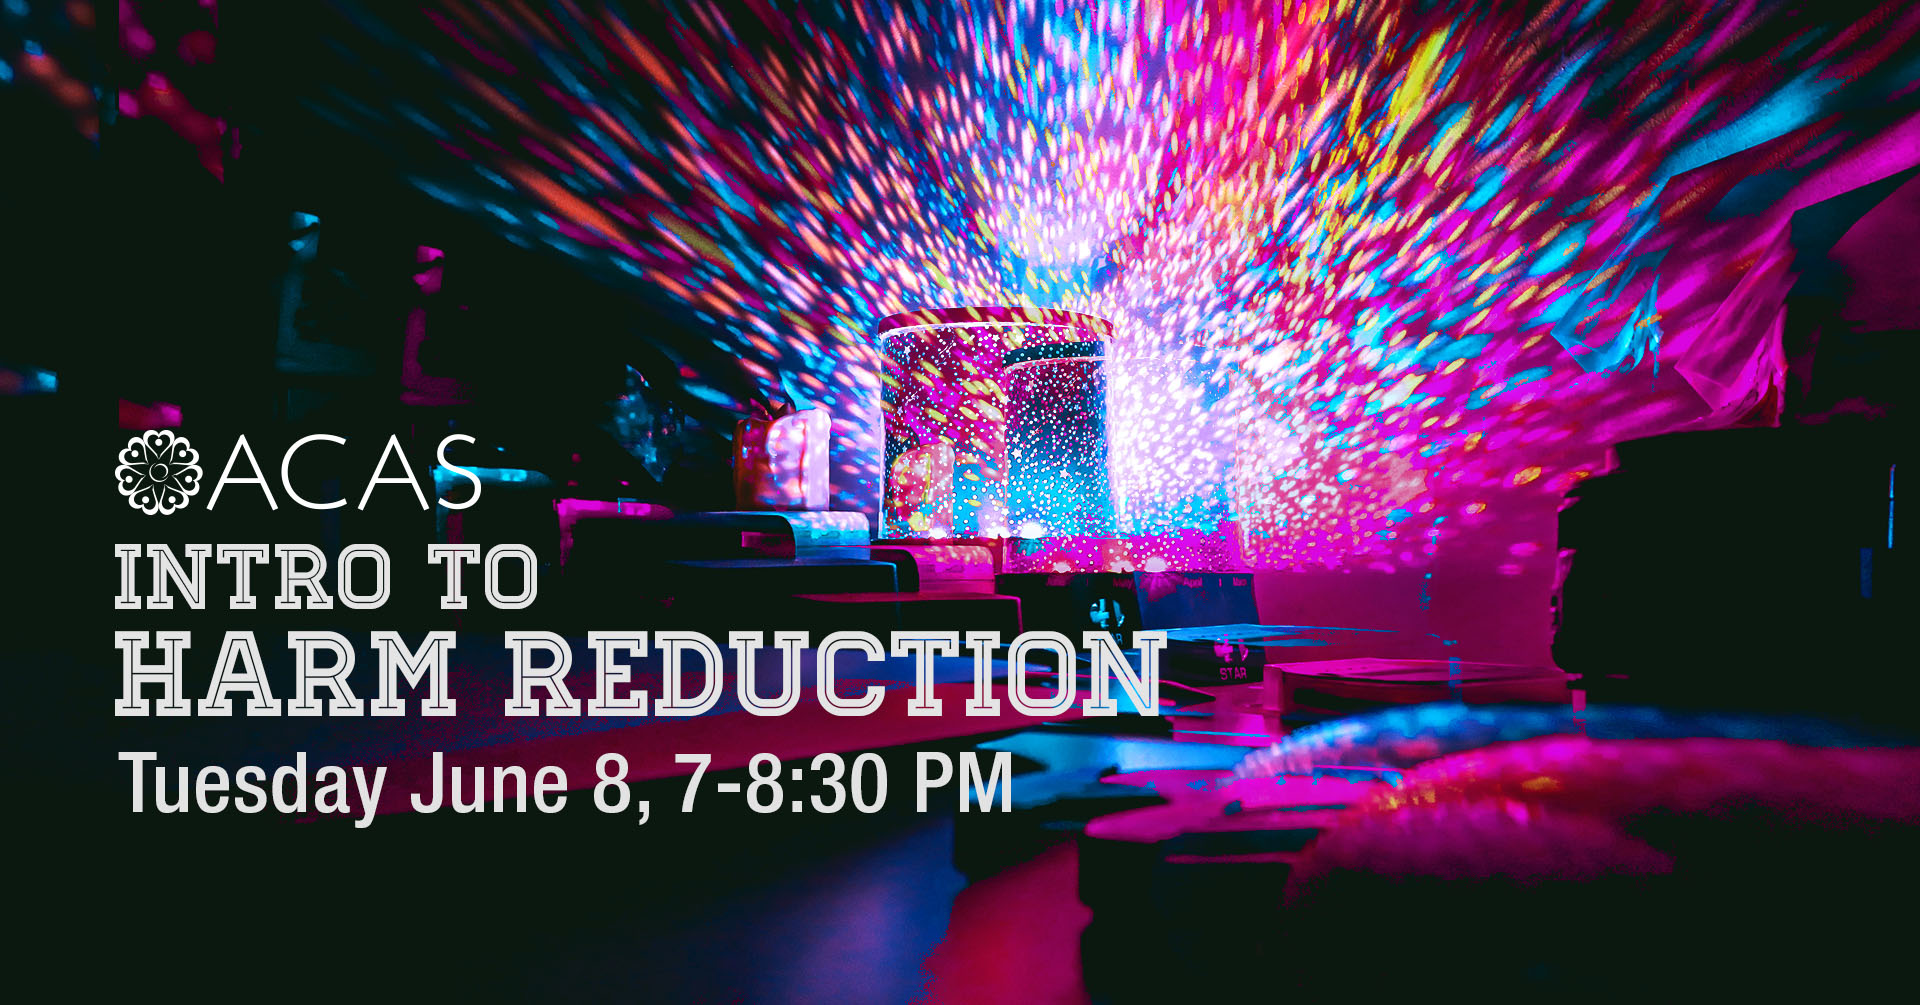 poster for intro to harm reduction workshop june 8